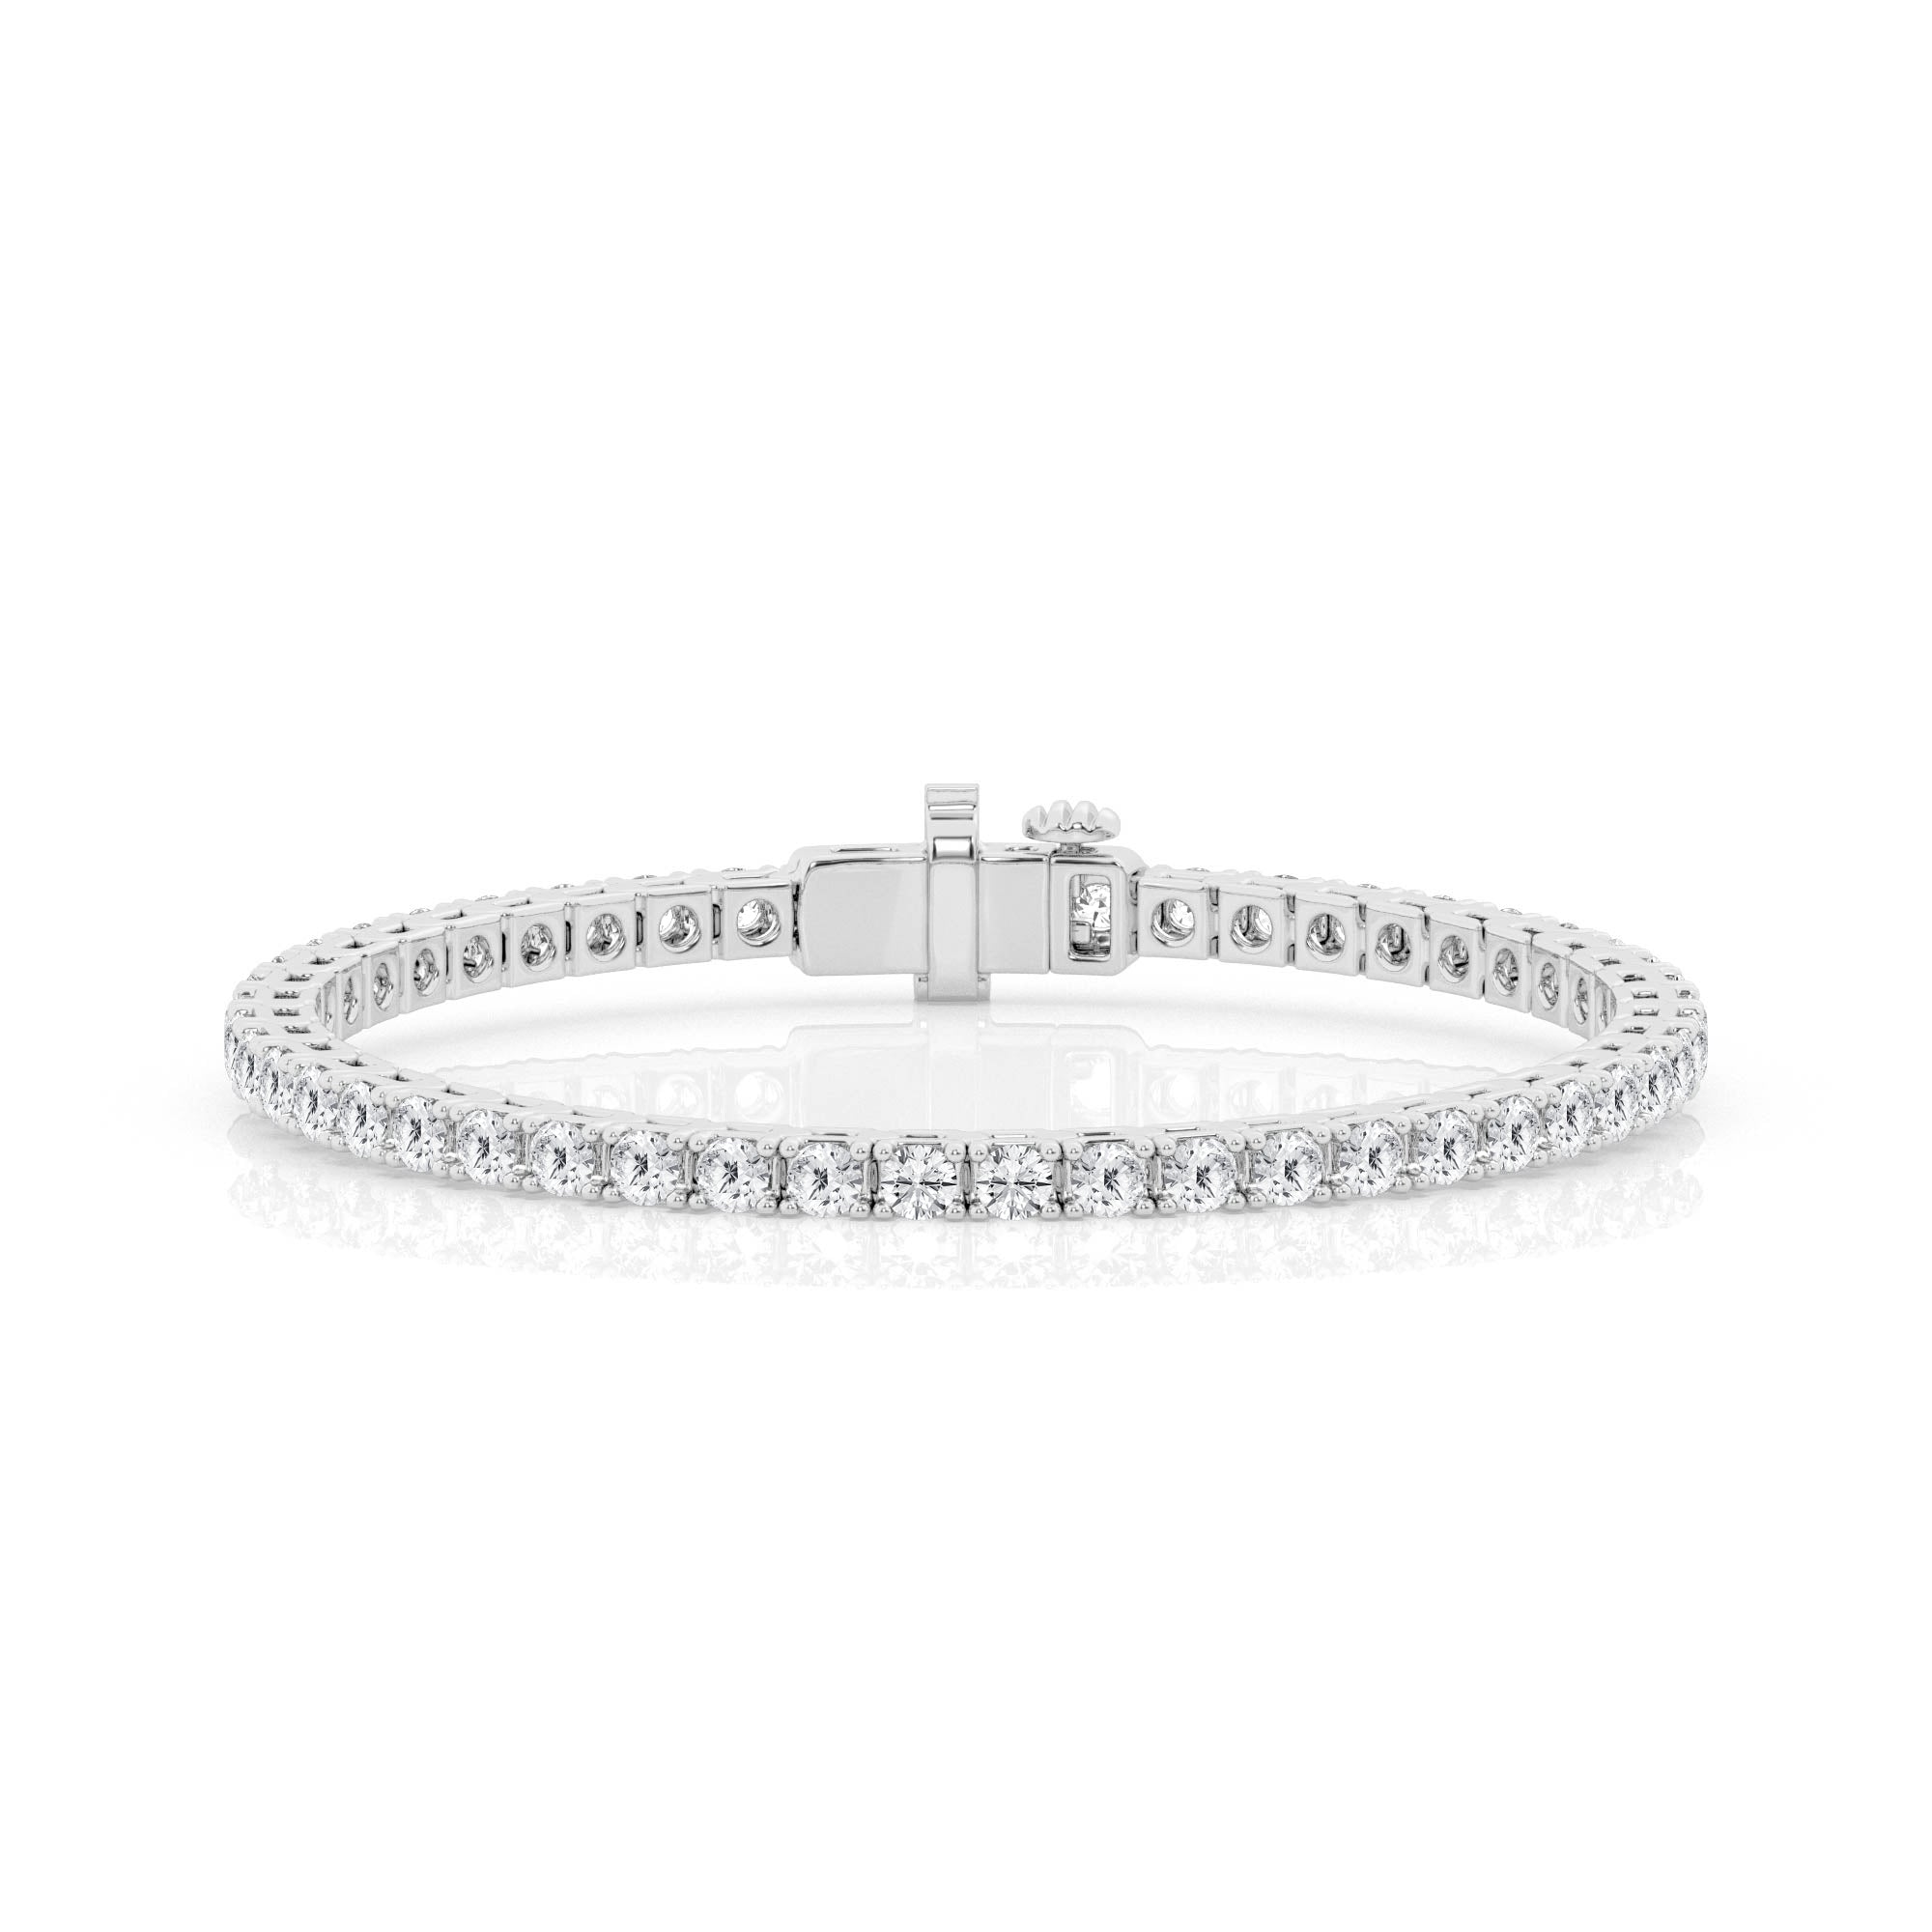 Lab-grown white gold tennis bracelet with 10 carats